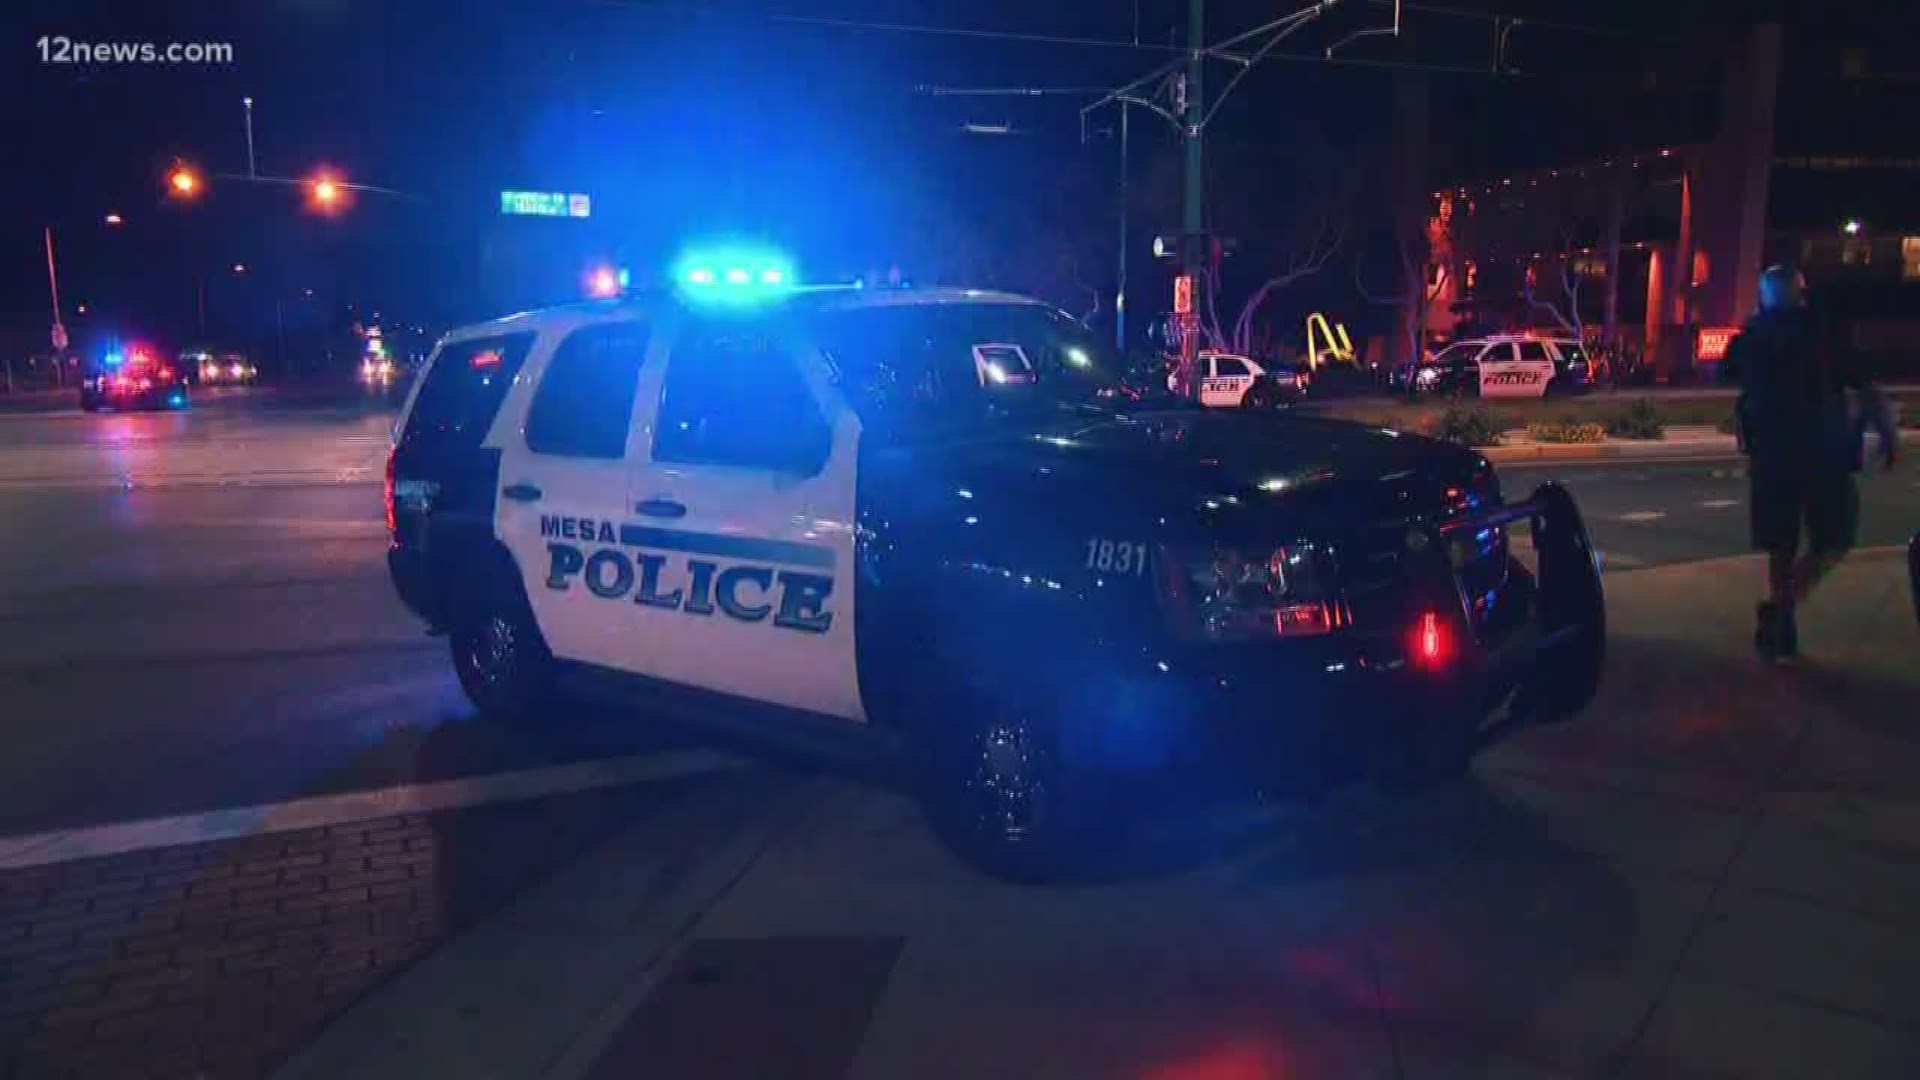 Mesa Police say they're investigating after an officer used a patrol car to hit a suspect who was walking on the street. Was the use of force justified or too much? We investigate the rules surrounding this type of force used.